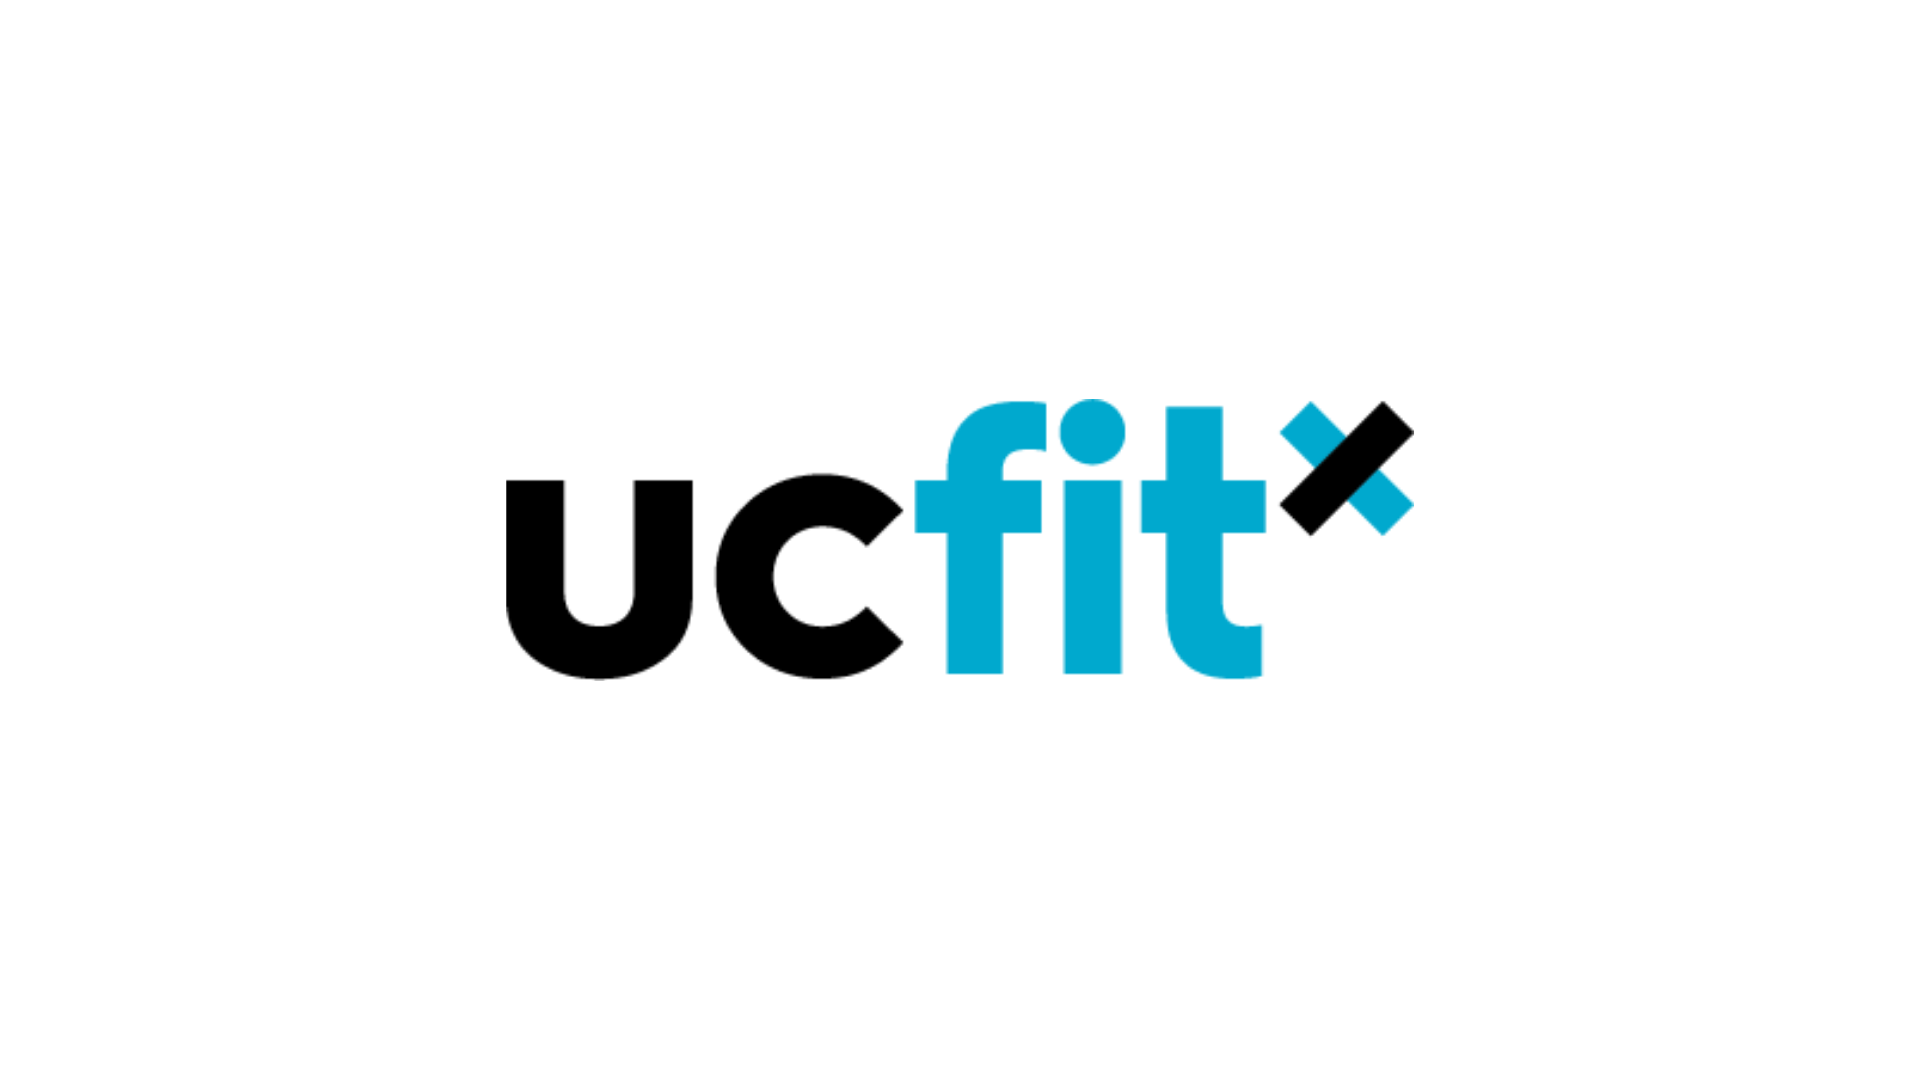 The word 'UCFitx' appears as a logo. The 'UC' portion appears in black while the 'life' portion appears in light blue. The 'x' is indexed above the 't' of 'fit' and is both black and blue. 